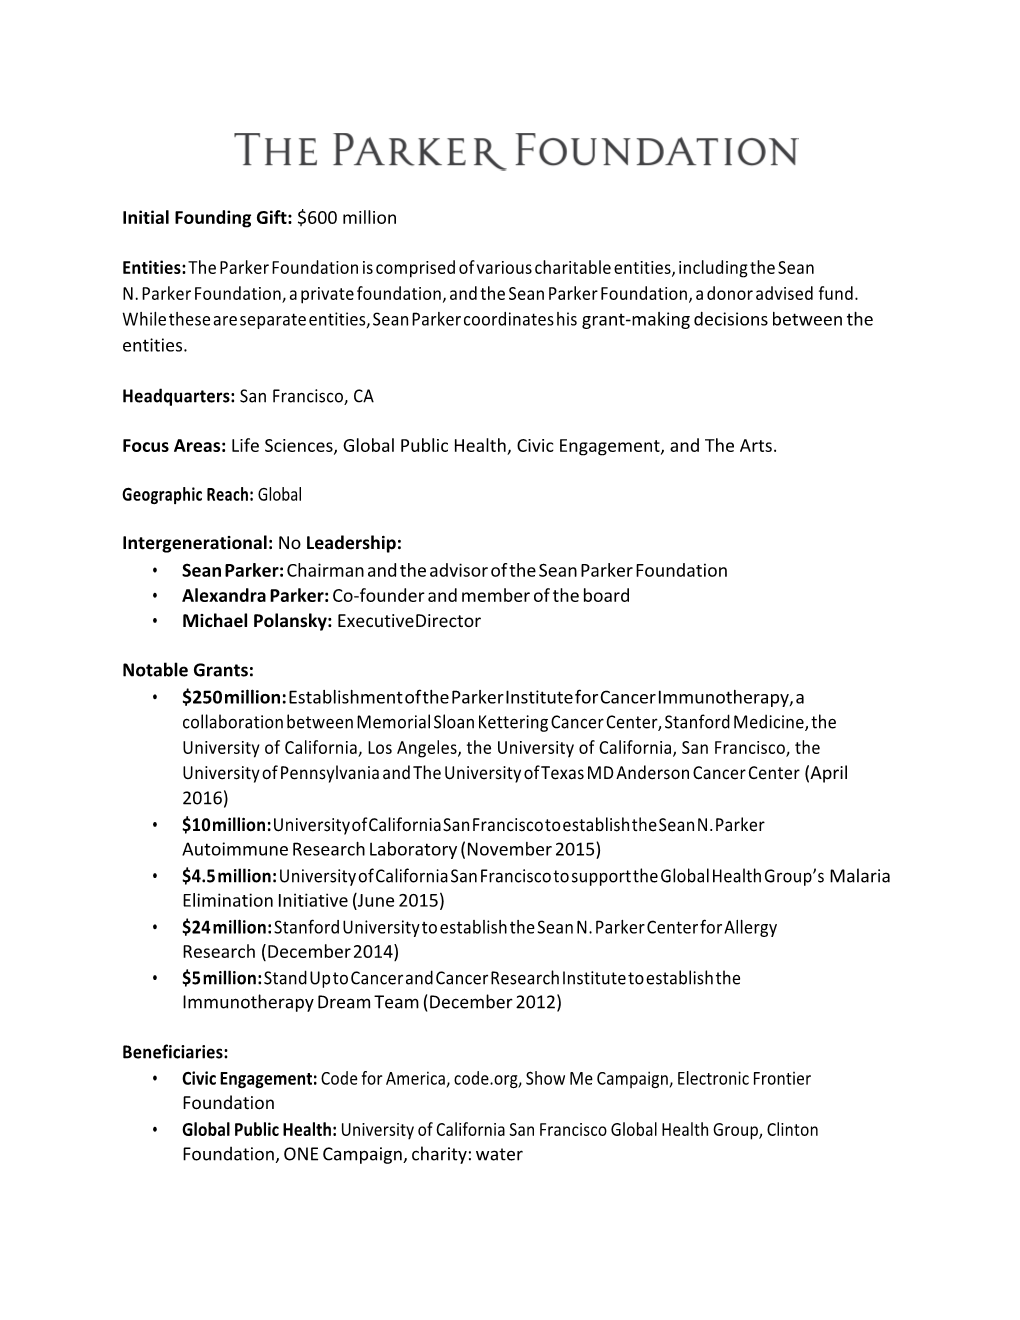 The Parker Foundation Fact Sheet